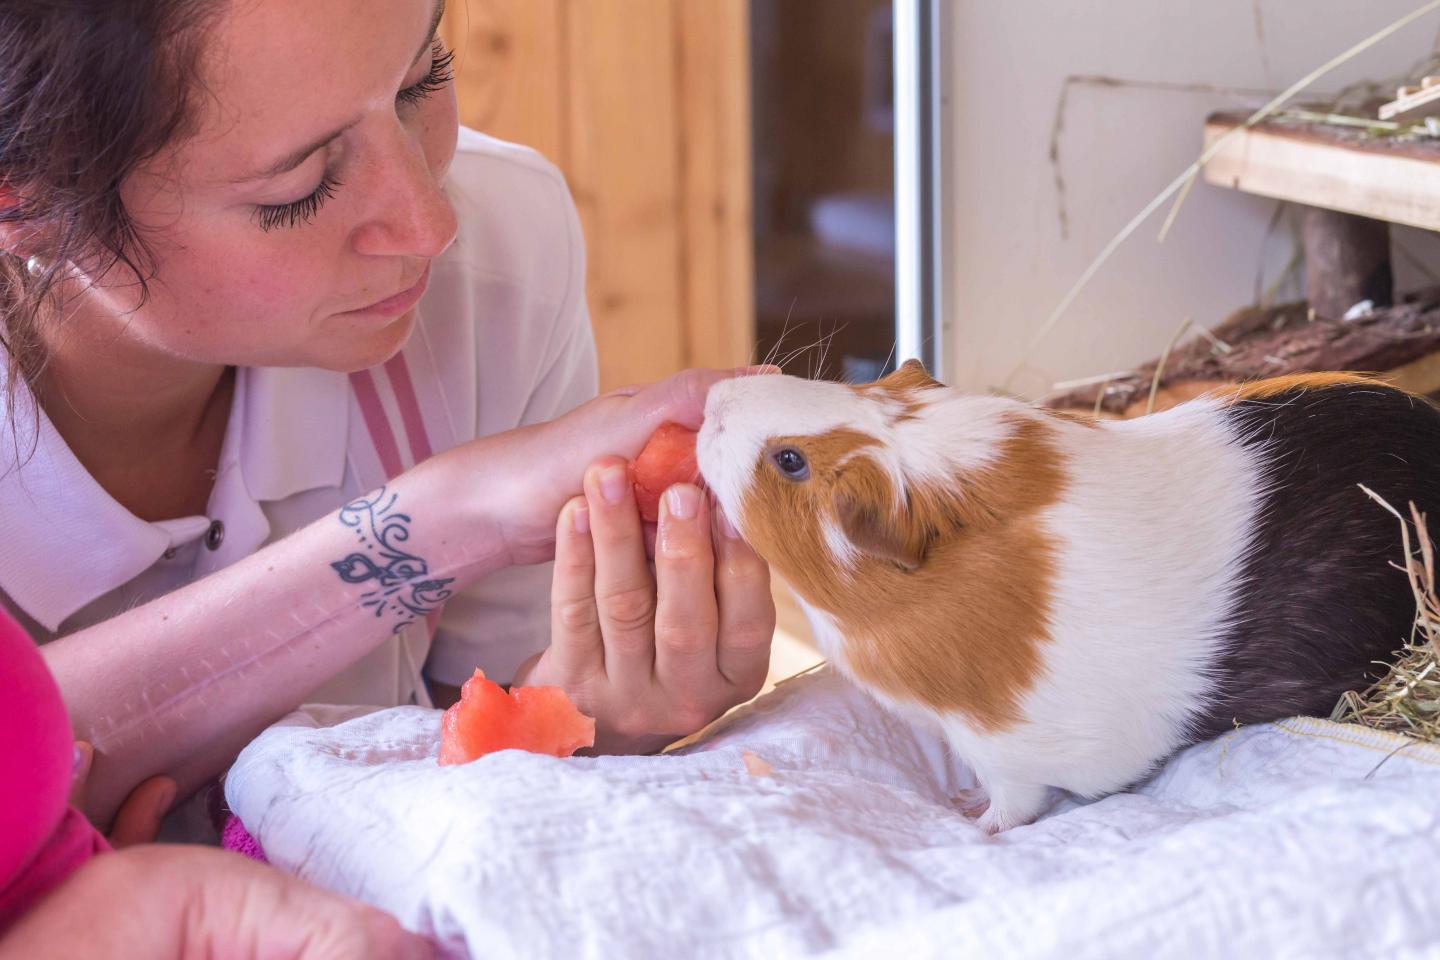 Animal-Assisted therapy Improves Social Behavior in Patients with Brain Injuries